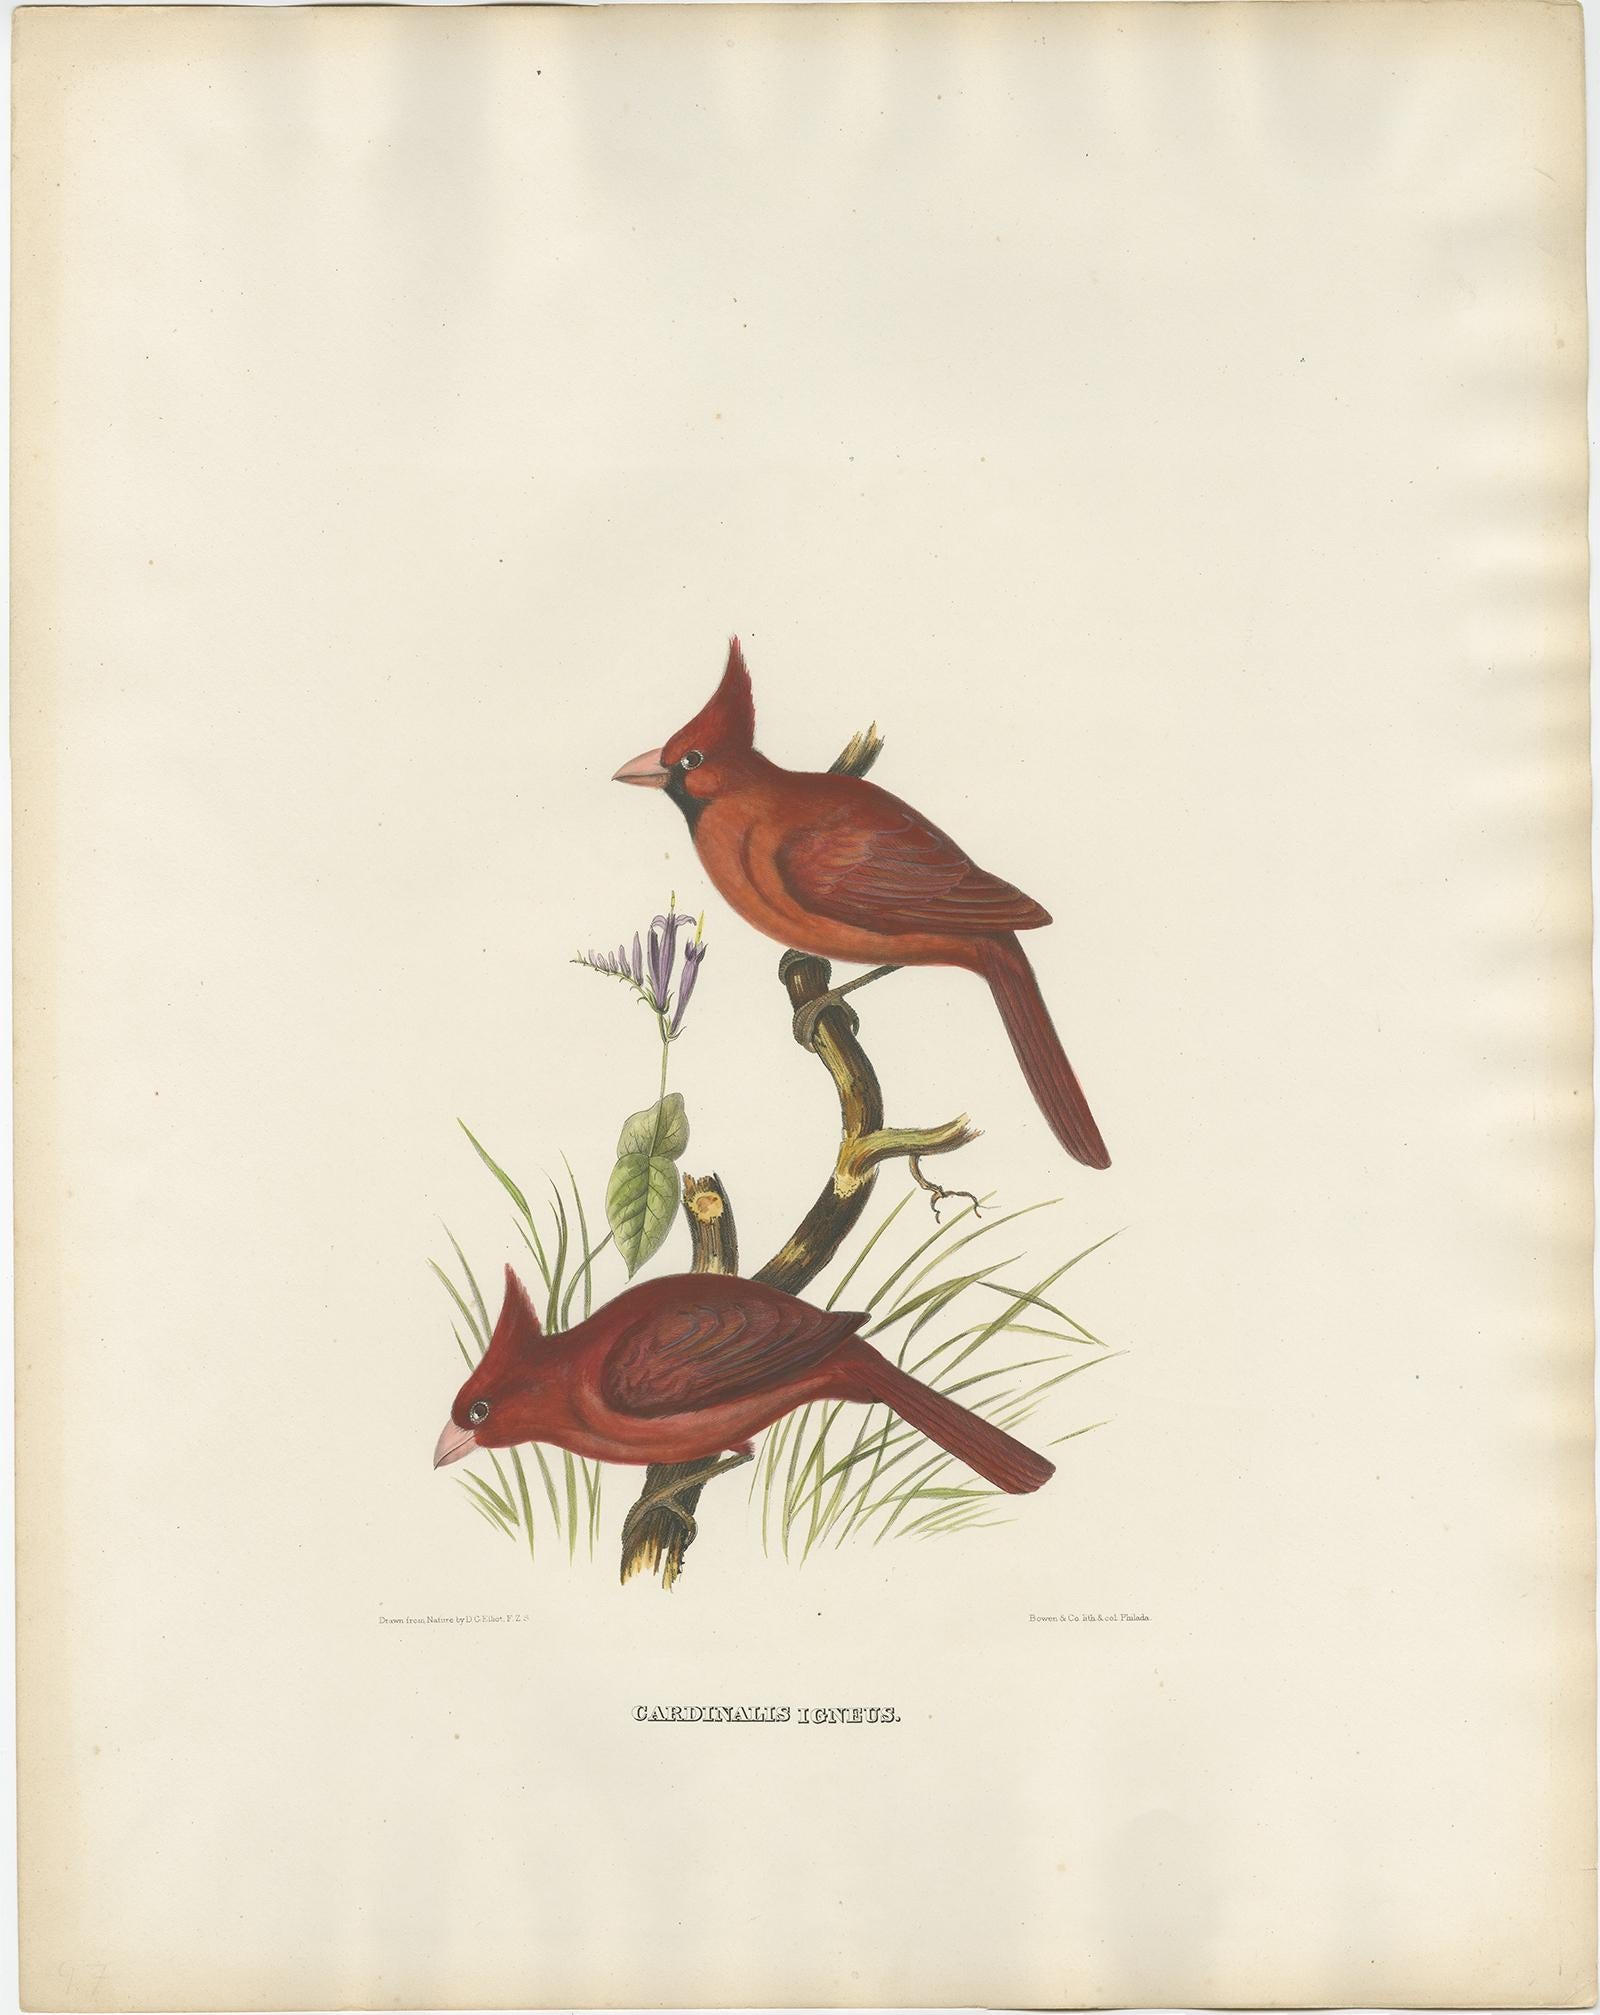 Antique bird print titled 'Cardinalis Igneus'. 

Old bird print depicting Northern Cardinals. This print originates from 'The new and heretofore unfigured species of the birds of North America', published 1866-1869.

This spectacular large folio